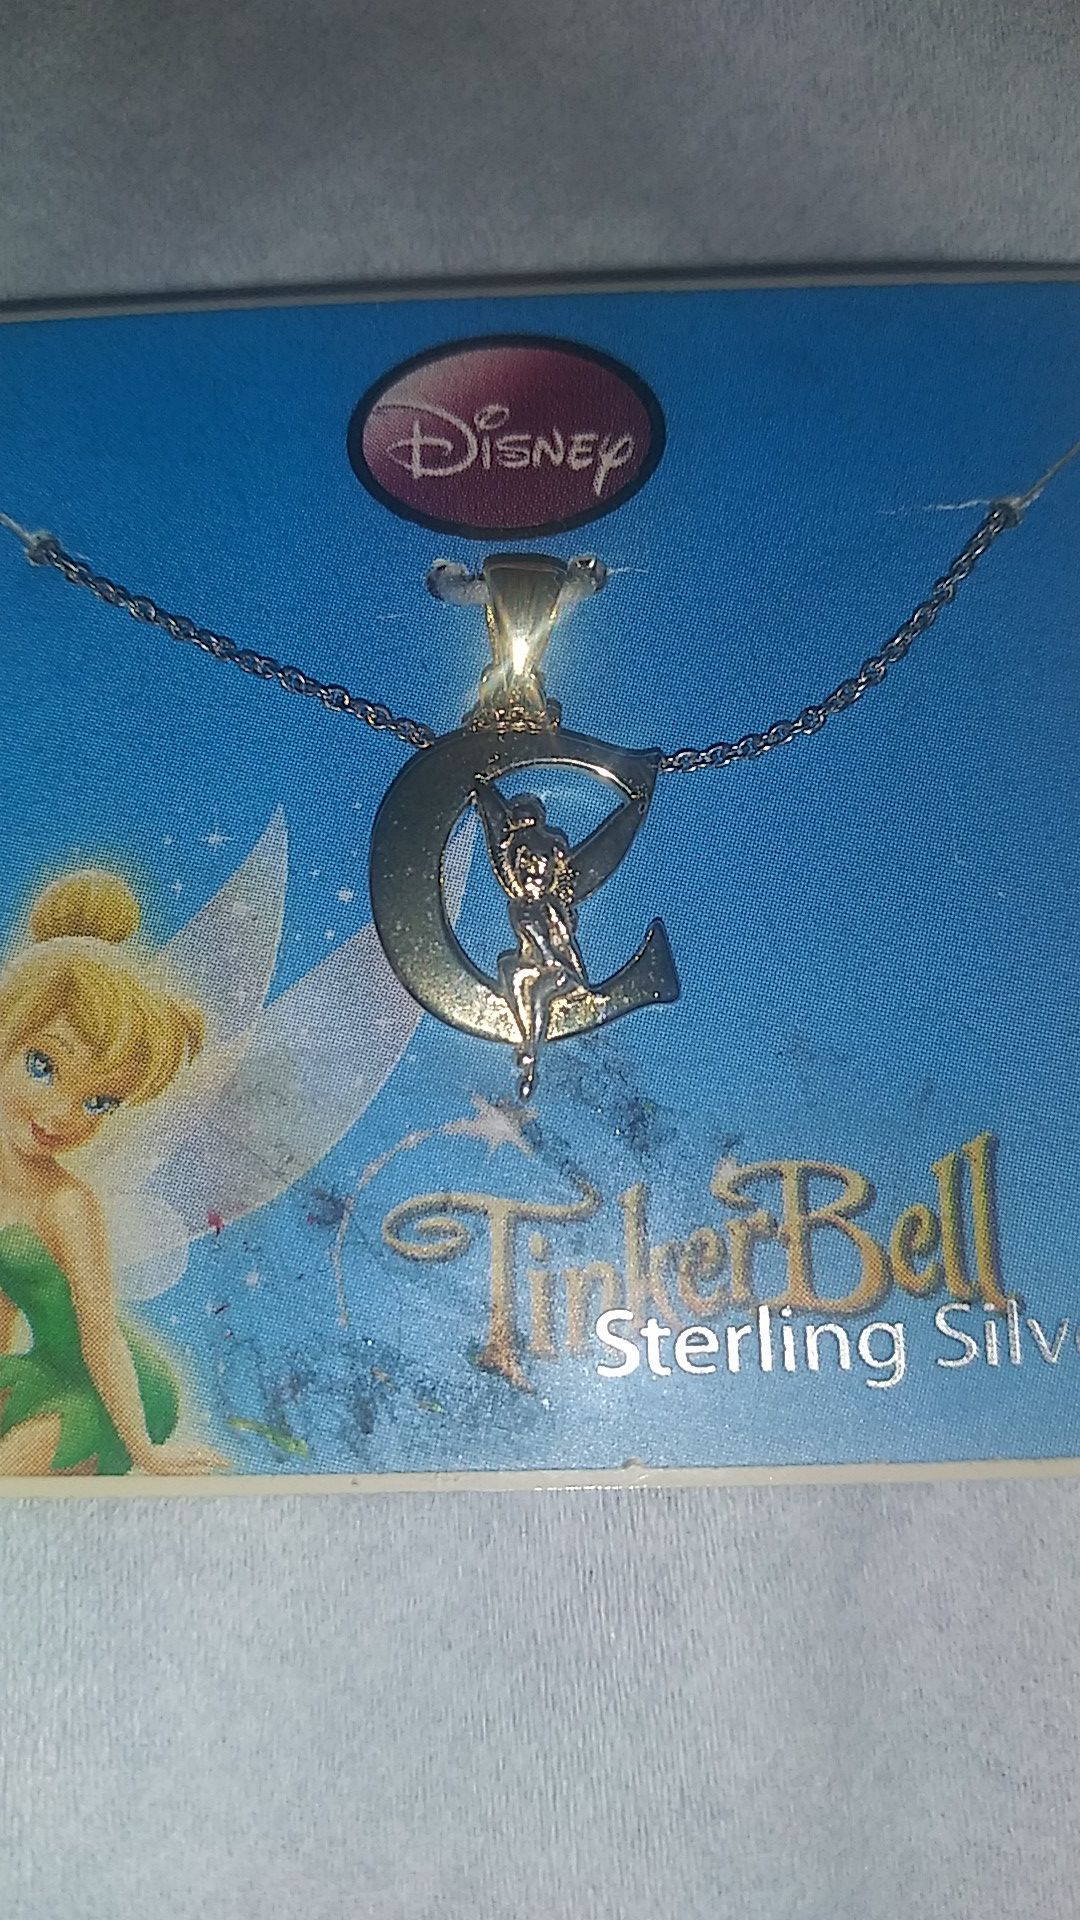 Brand new Tinkerbell sterling silver necklace